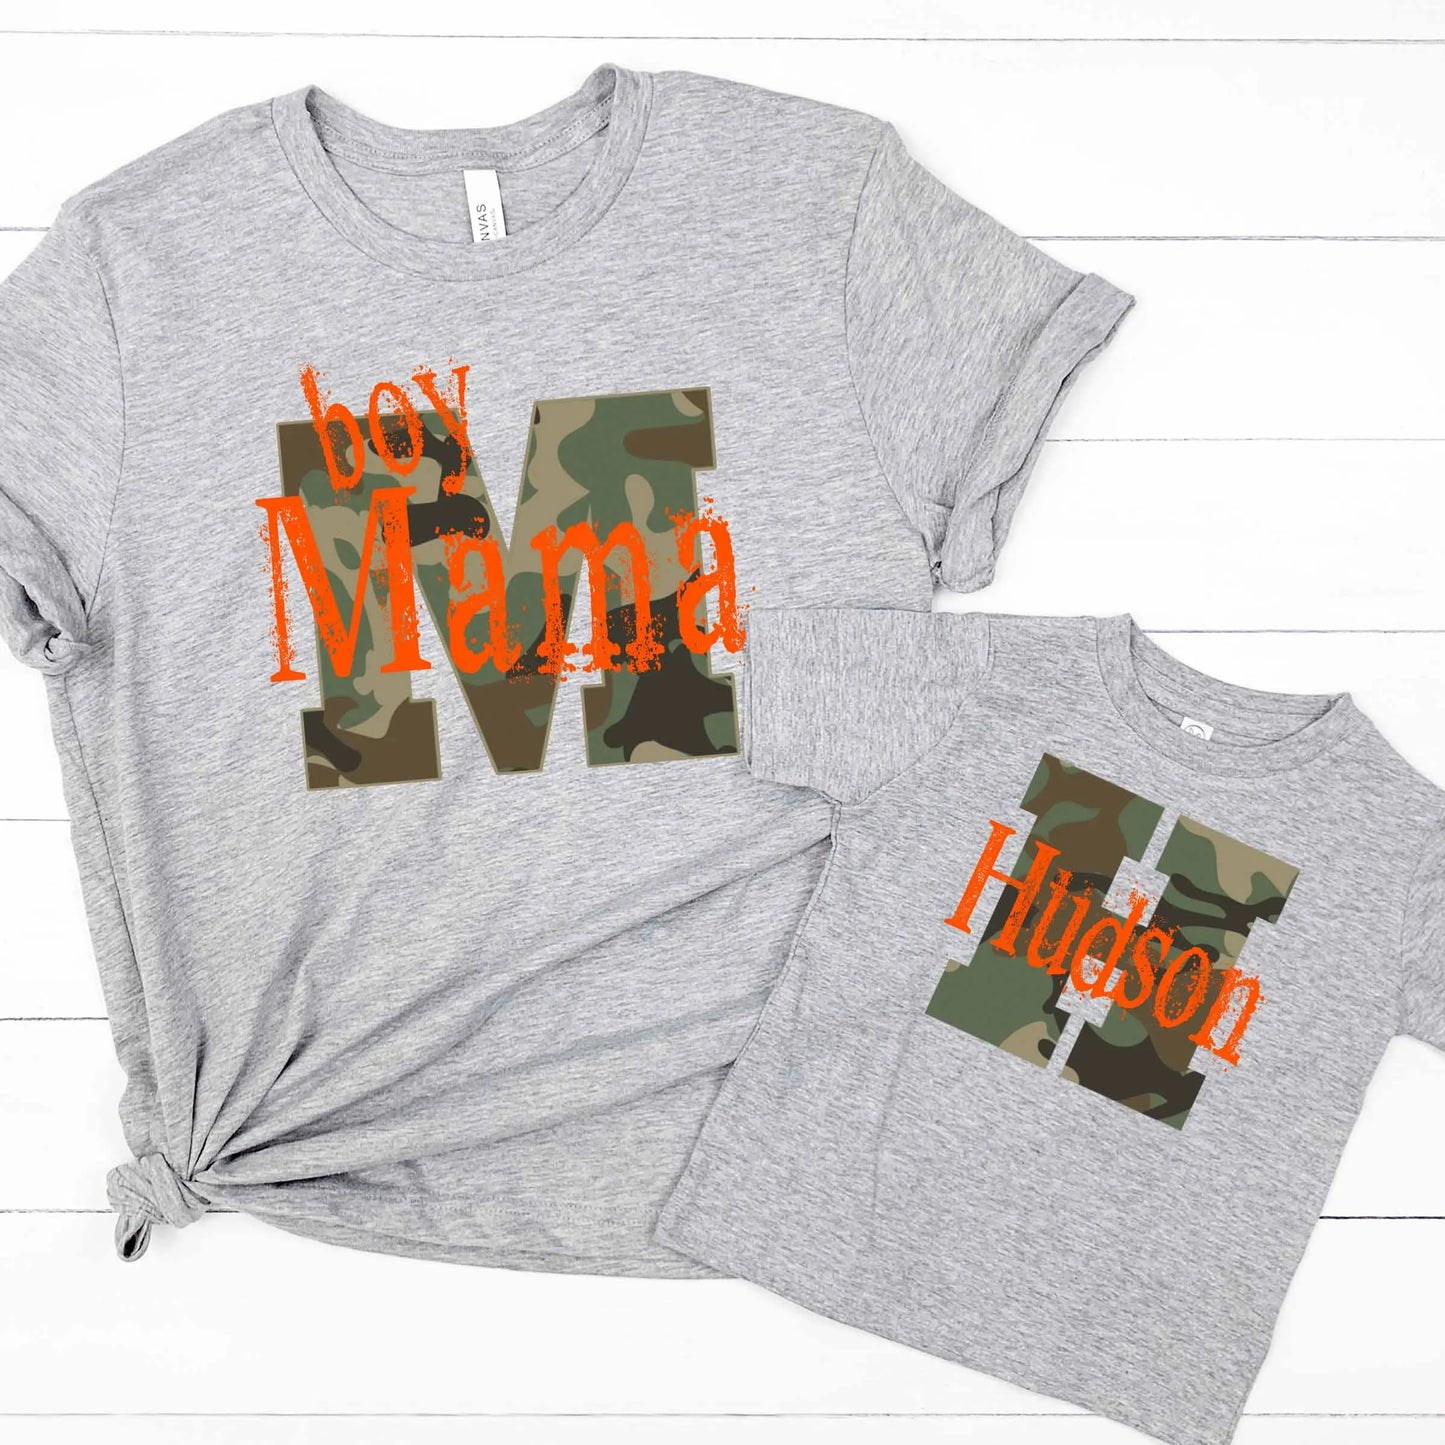 Personalized Camo Name Toddler t-shirt Amazing Faith Designs